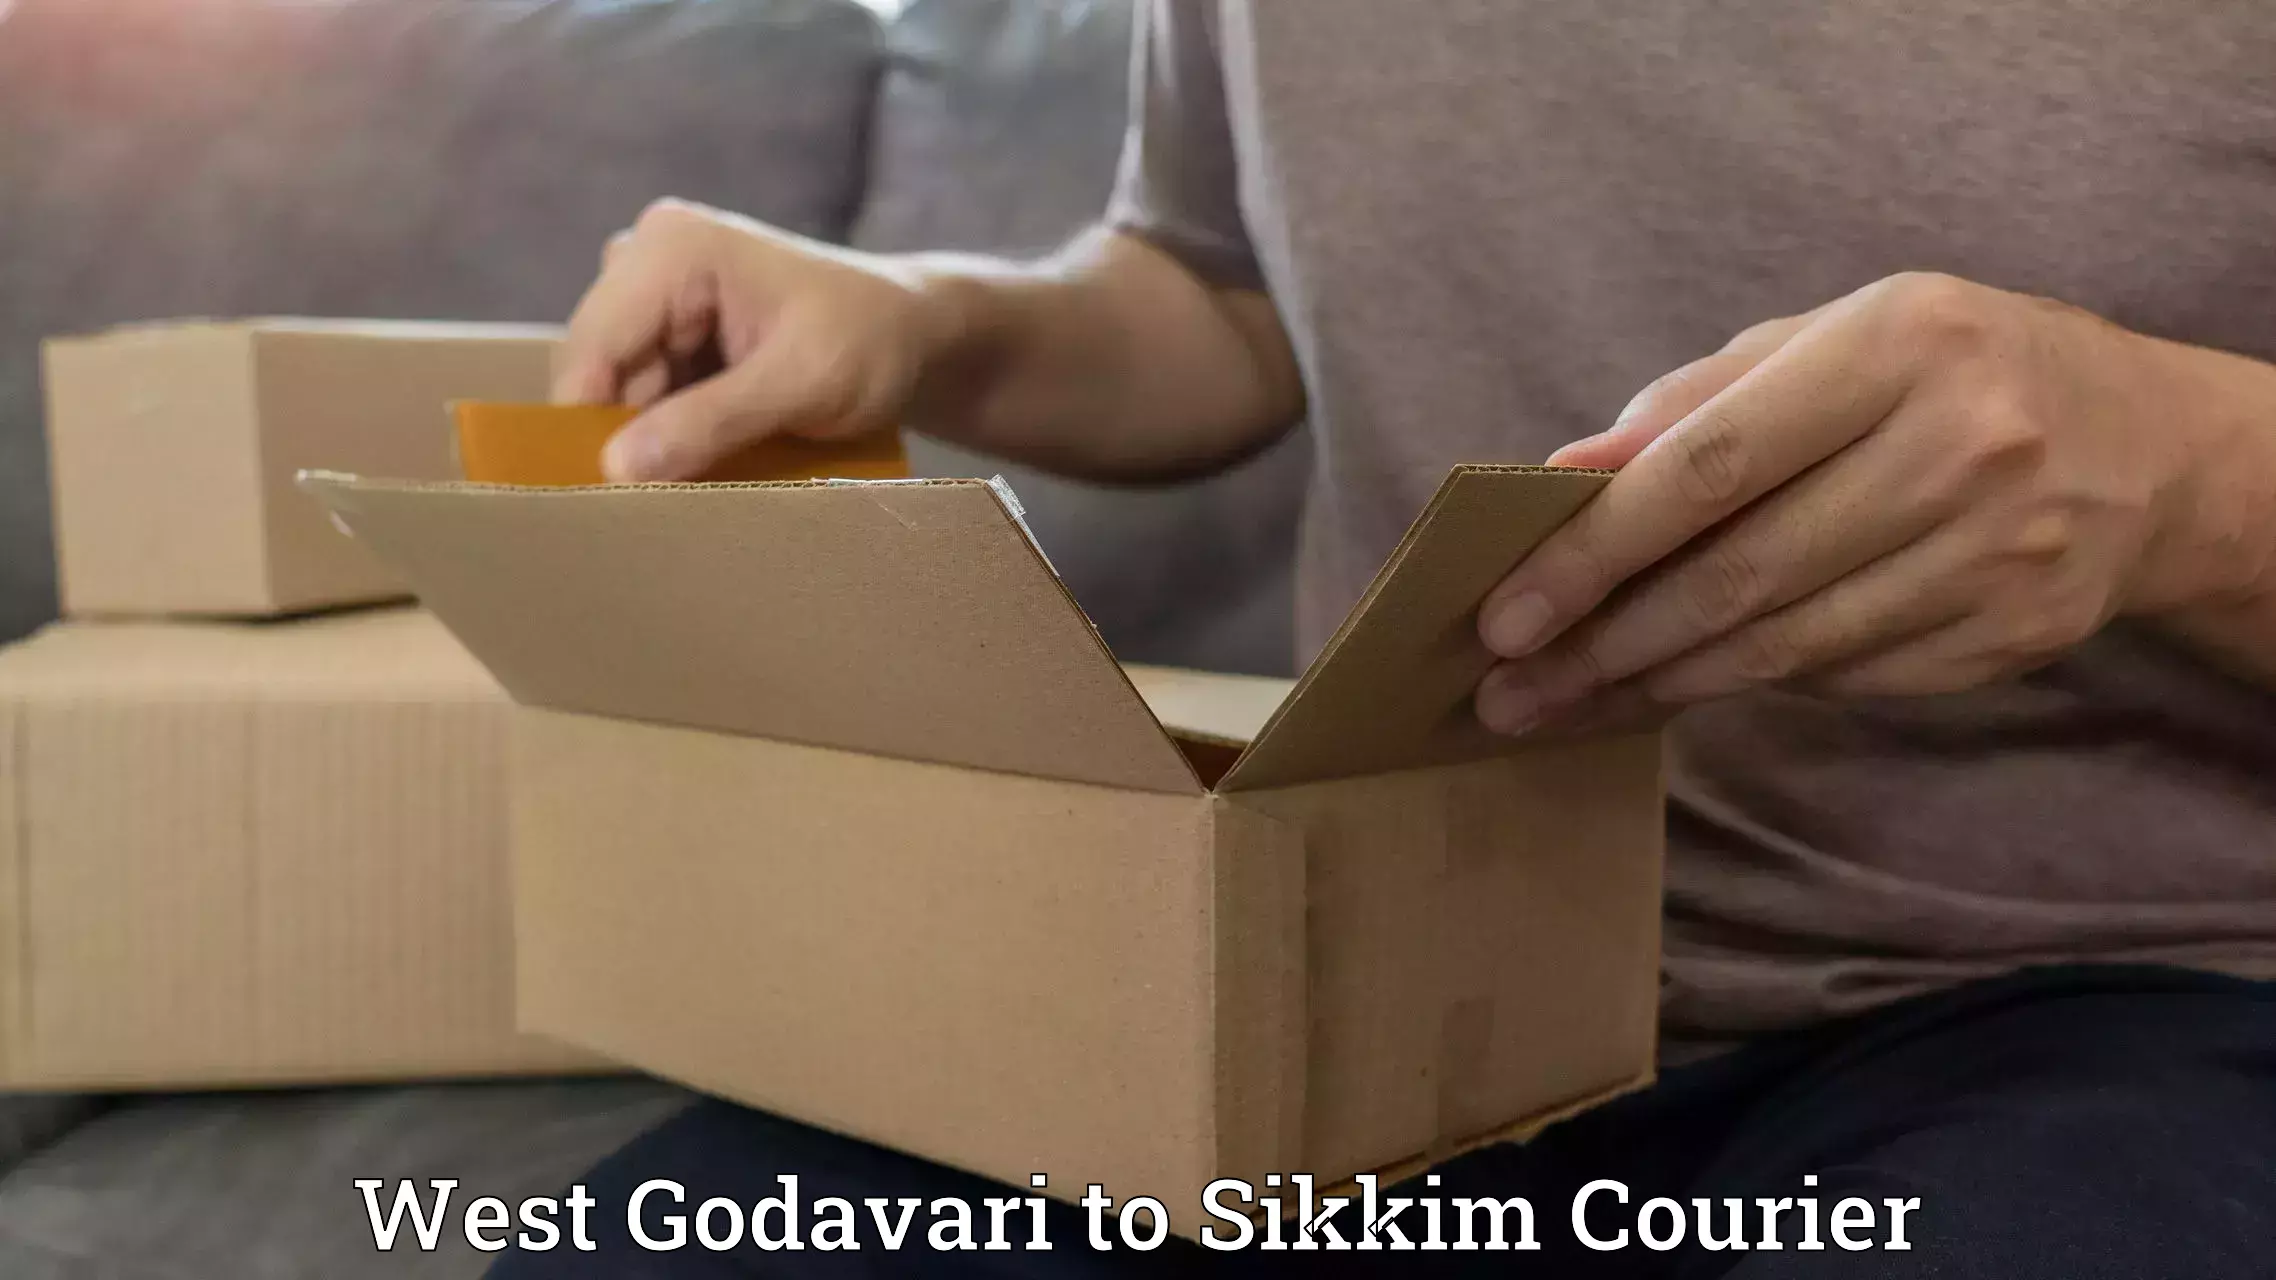 State-of-the-art courier technology West Godavari to Rangpo